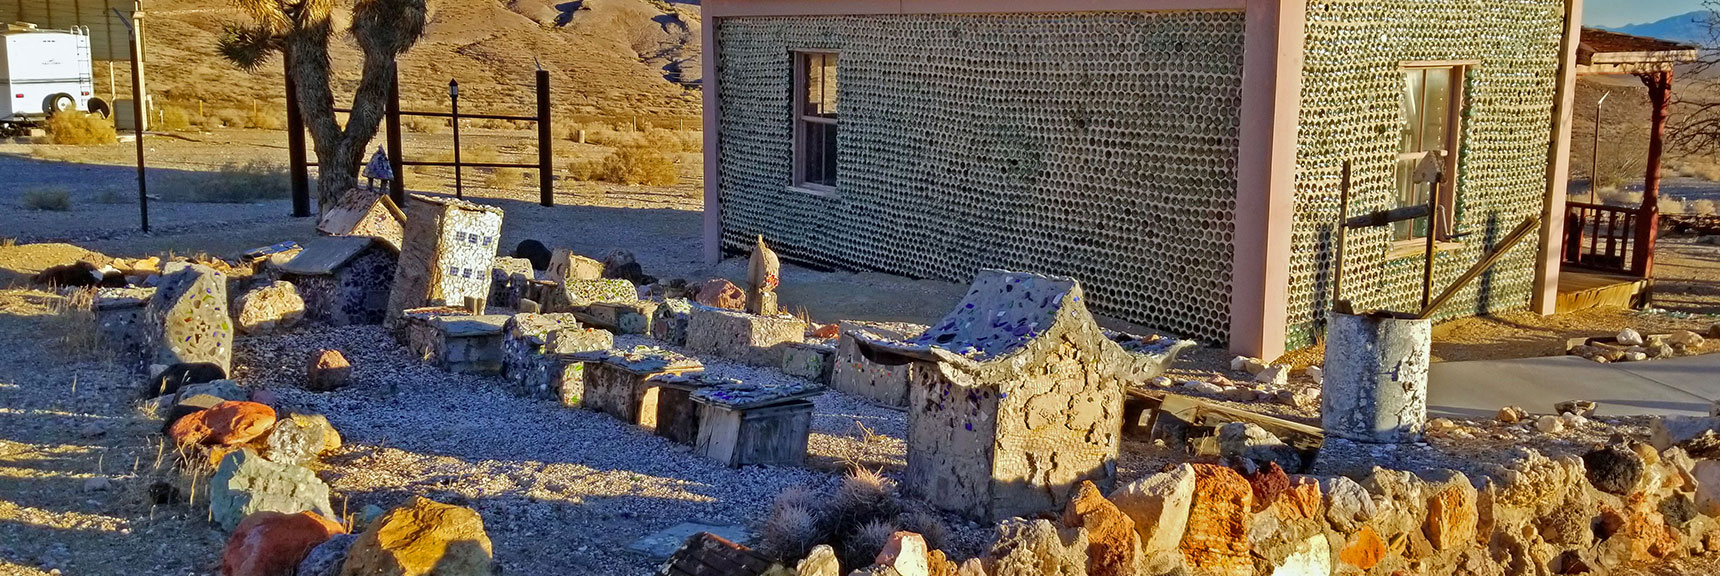 Miniature Town Art Piece at Tom Kelly Bottle House | Rhyolite Ghost Town | Death Valley Area, Nevada